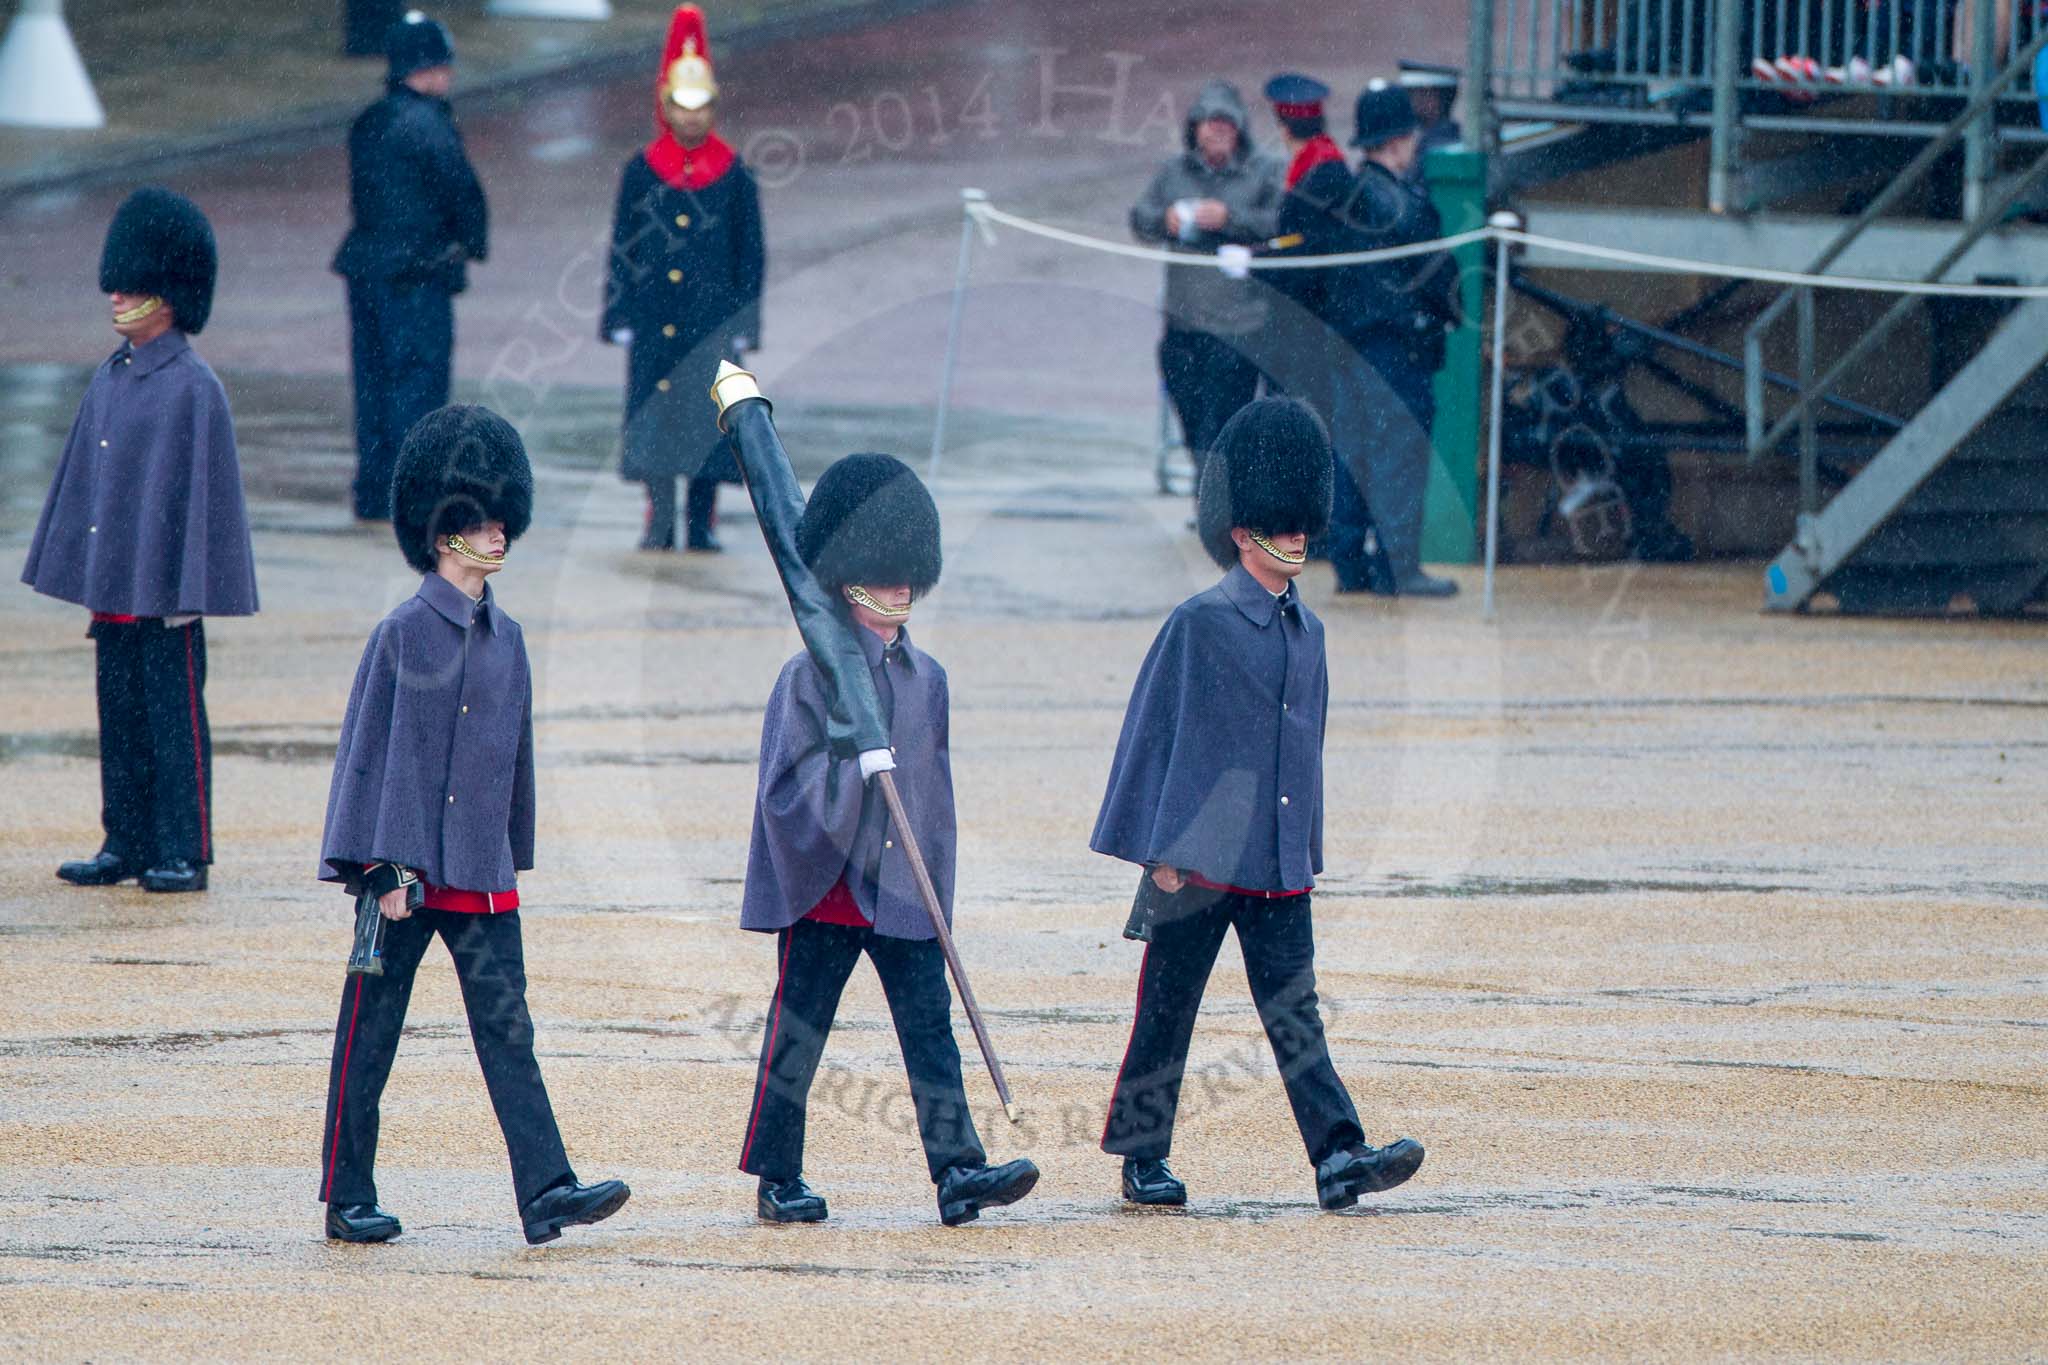 The Colonel's Review 2014.
Horse Guards Parade, Westminster,
London,

United Kingdom,
on 07 June 2014 at 10:20, image #96